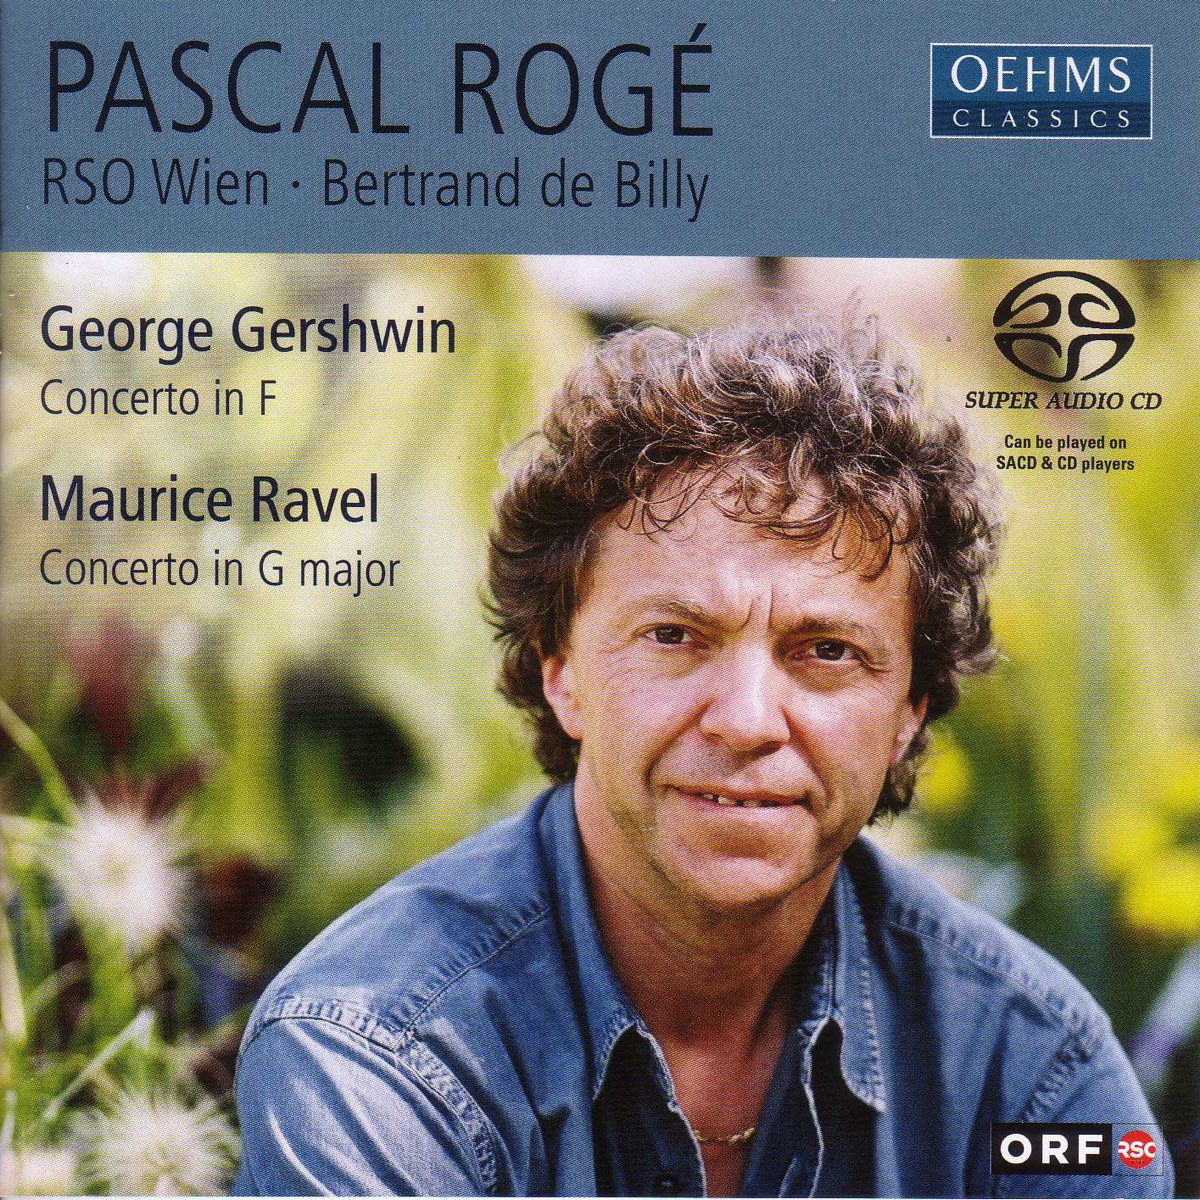 Pascal Roge – Gershwin: Concerto in F & Ravel: Concerto in G major (2004) MCH SACD ISO + DSF DSD64 + Hi-Res FLAC